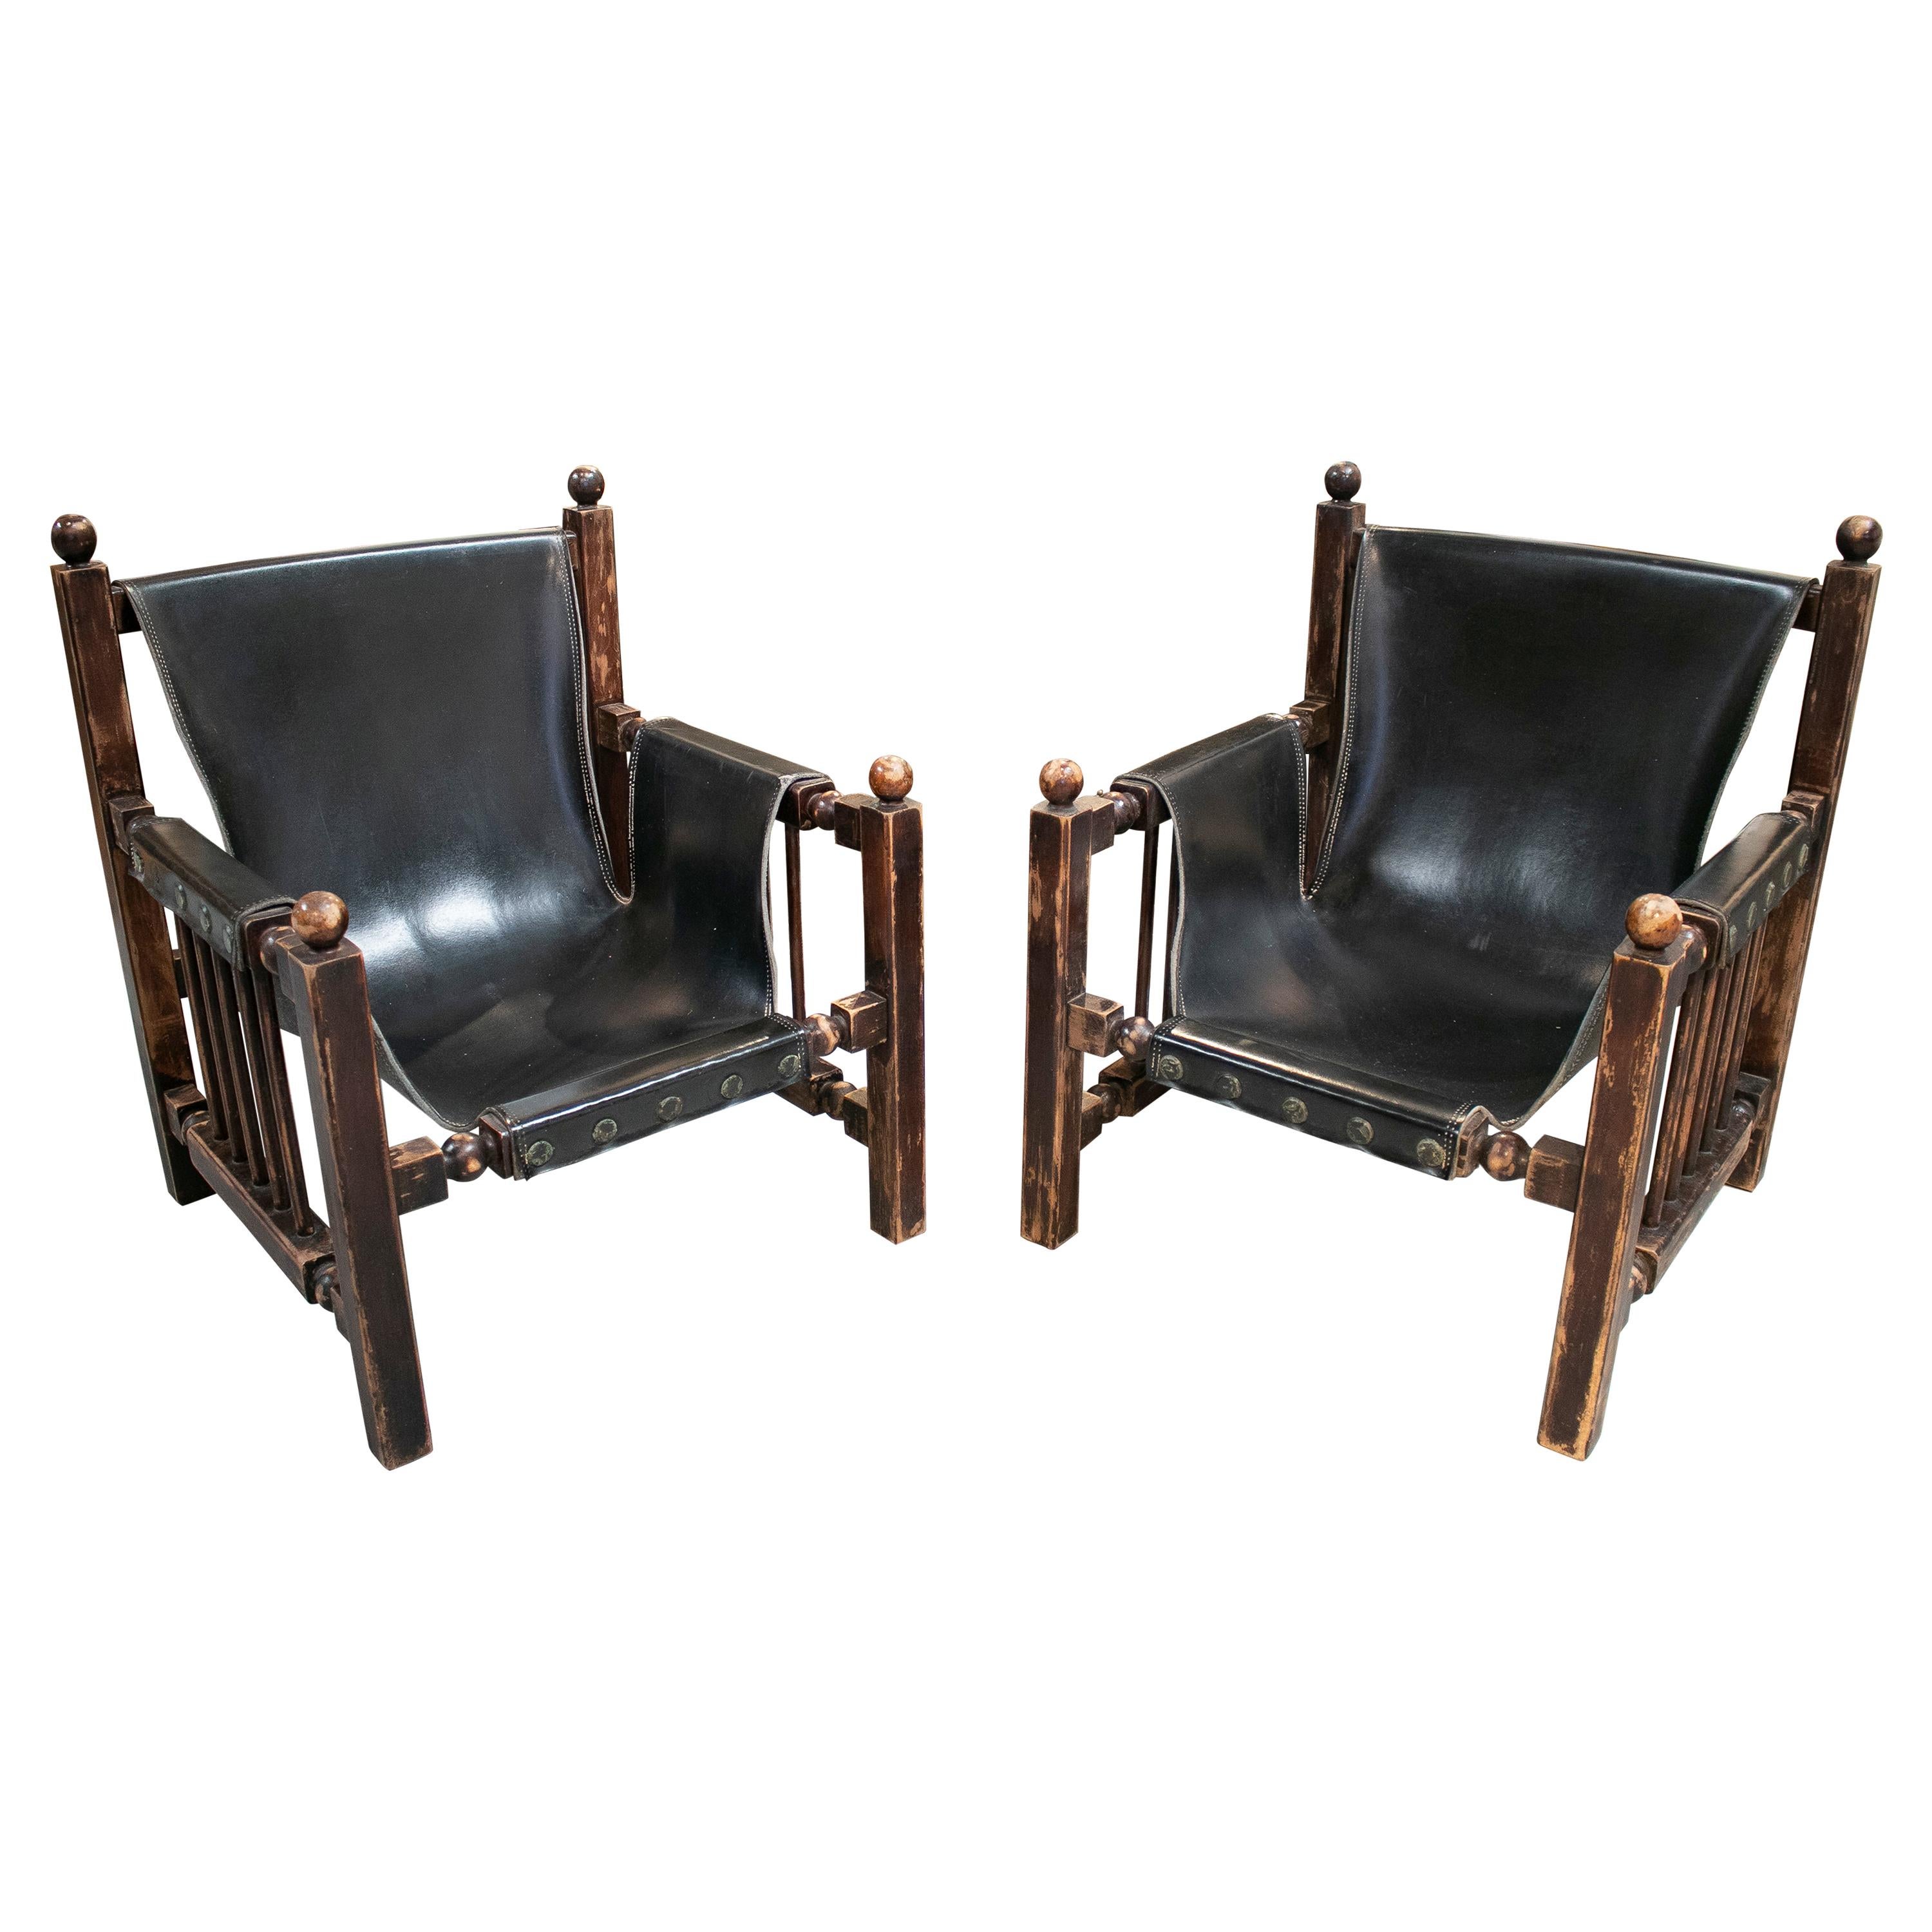 Paco Muñoz Designed Pair of Wood and Leather Armchairs